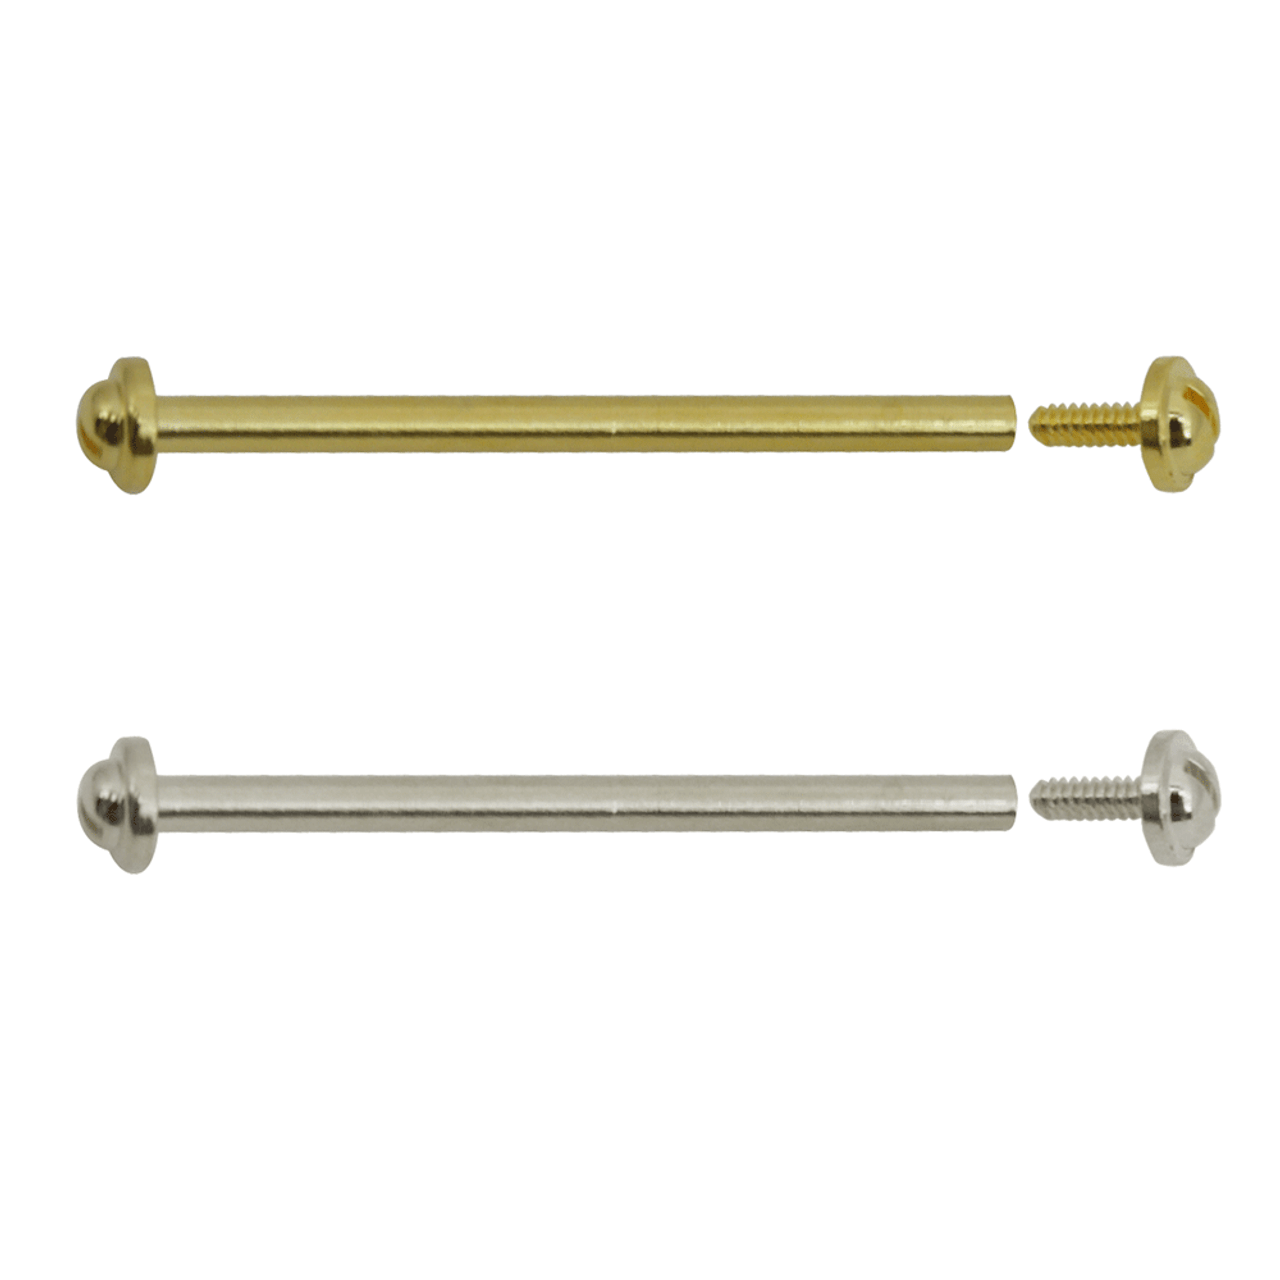 Gucci® Style Lug Screw Replacement Kits in White or Yellow